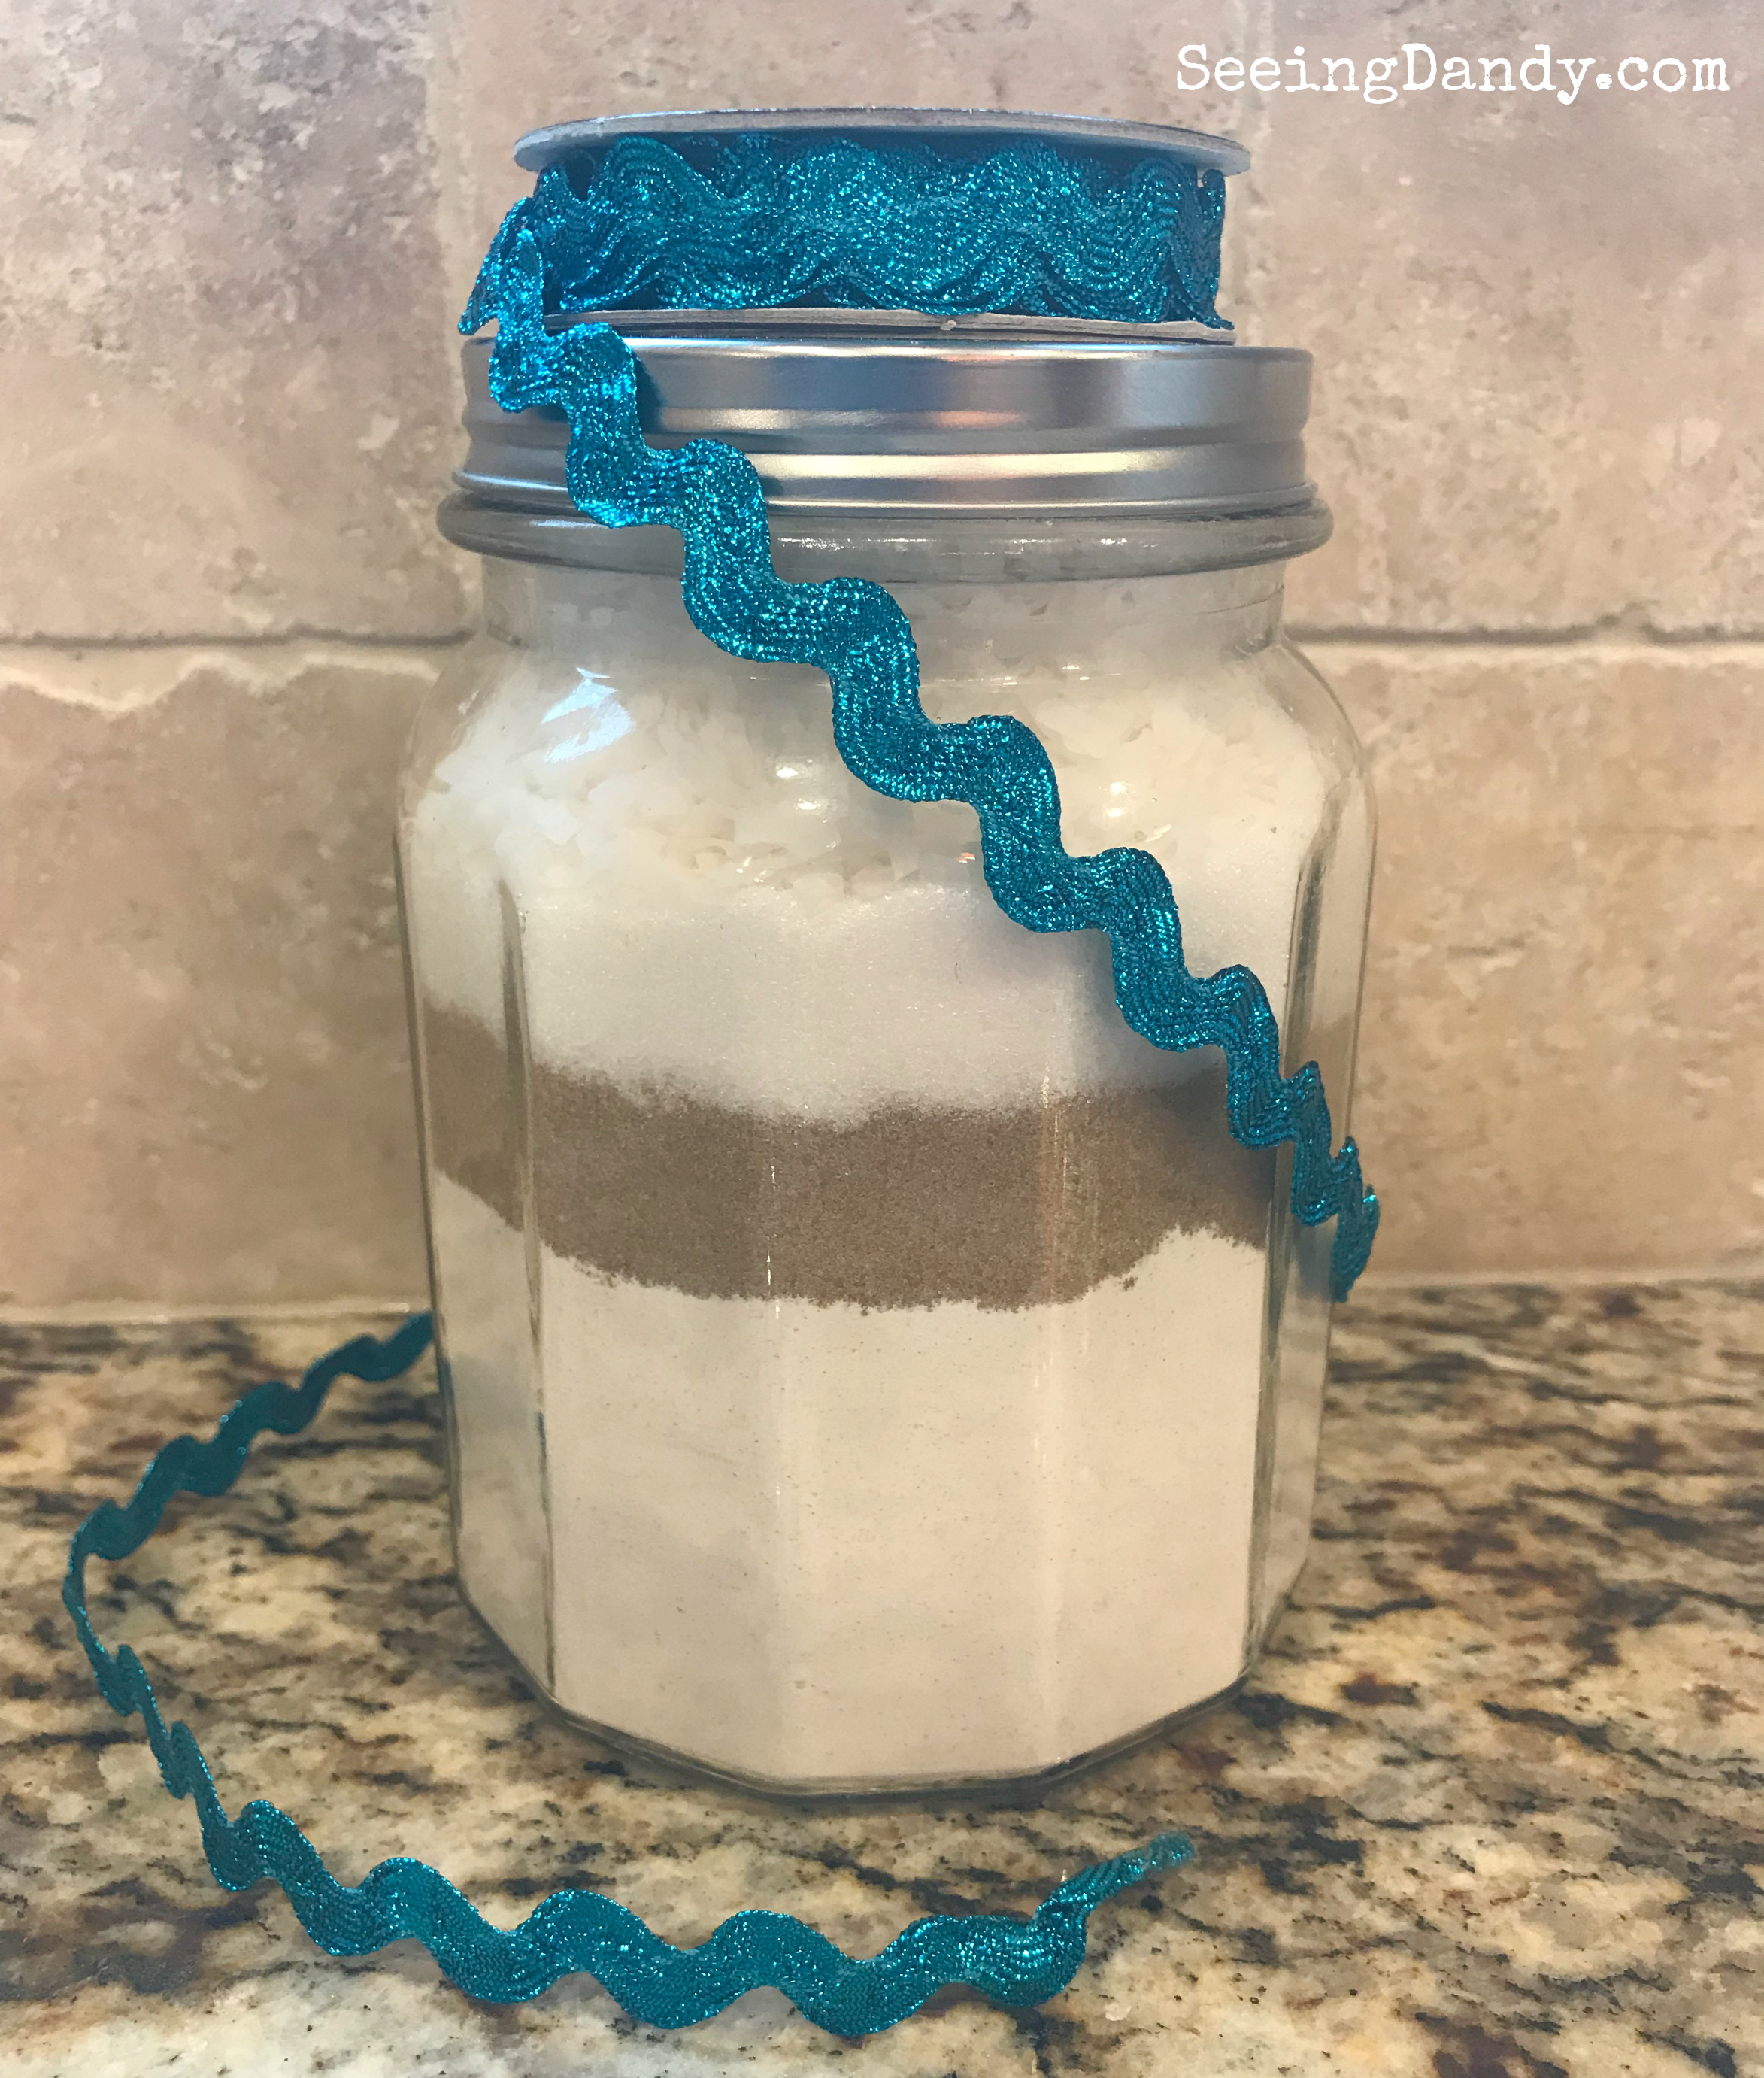 Snowflake cookies in a jar ingredients and layers with blue ribbon.